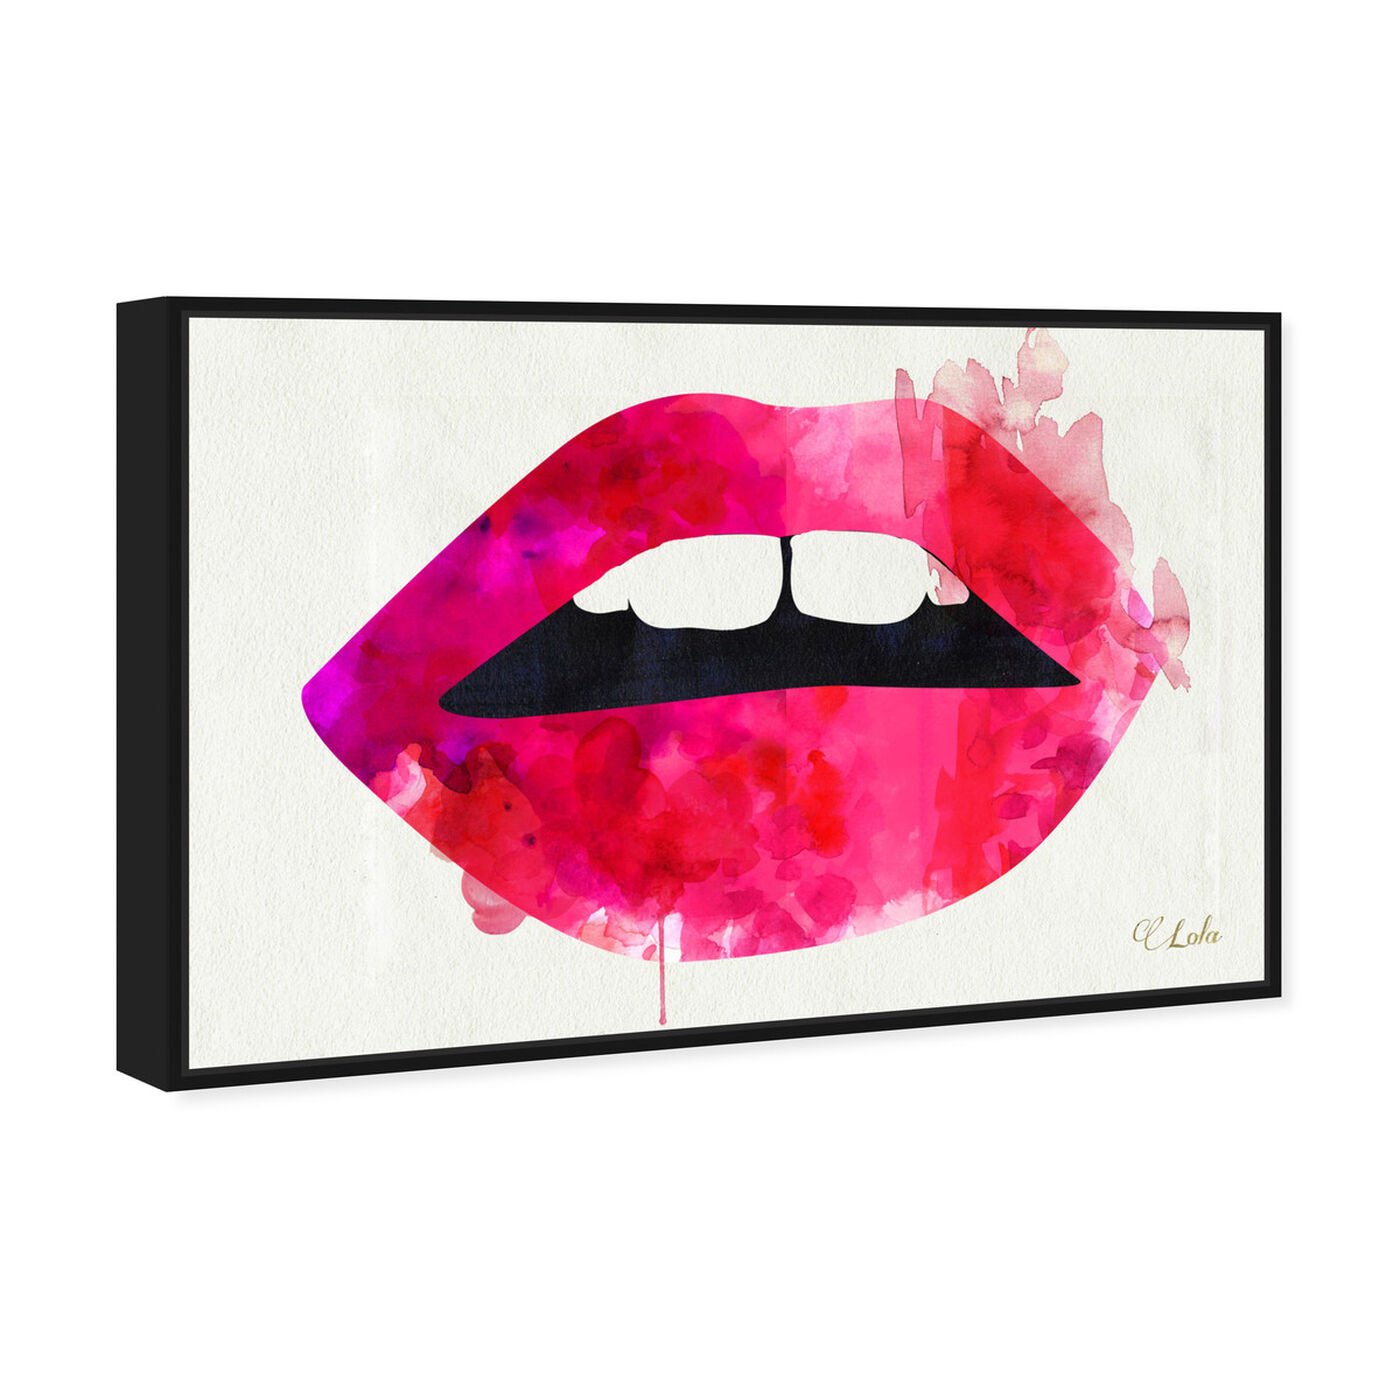 Angled view of Lola's Lips featuring fashion and glam and lips art.